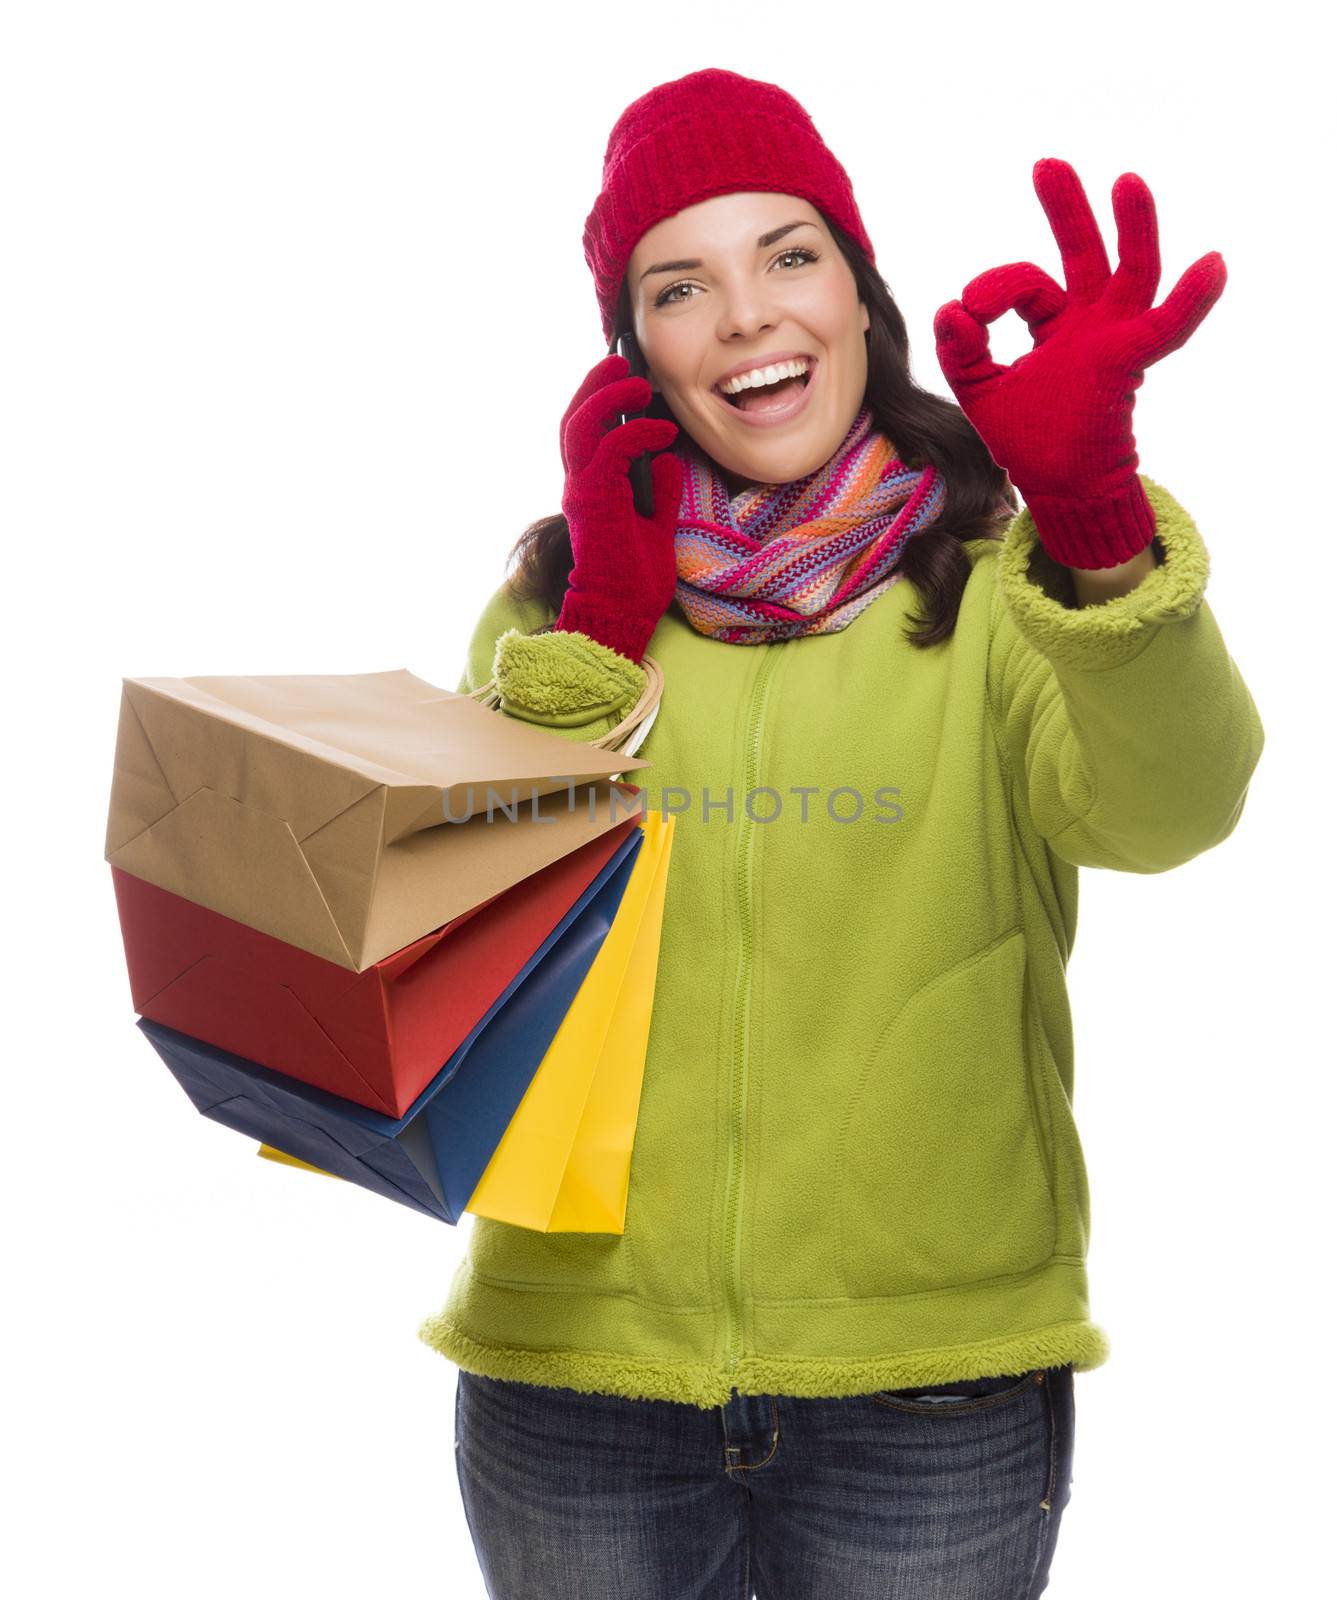 Mixed Race Woman Holding Shopping Bags Talking On Her Cell Phone Giving Ok Gesture Isolated on White Background.
